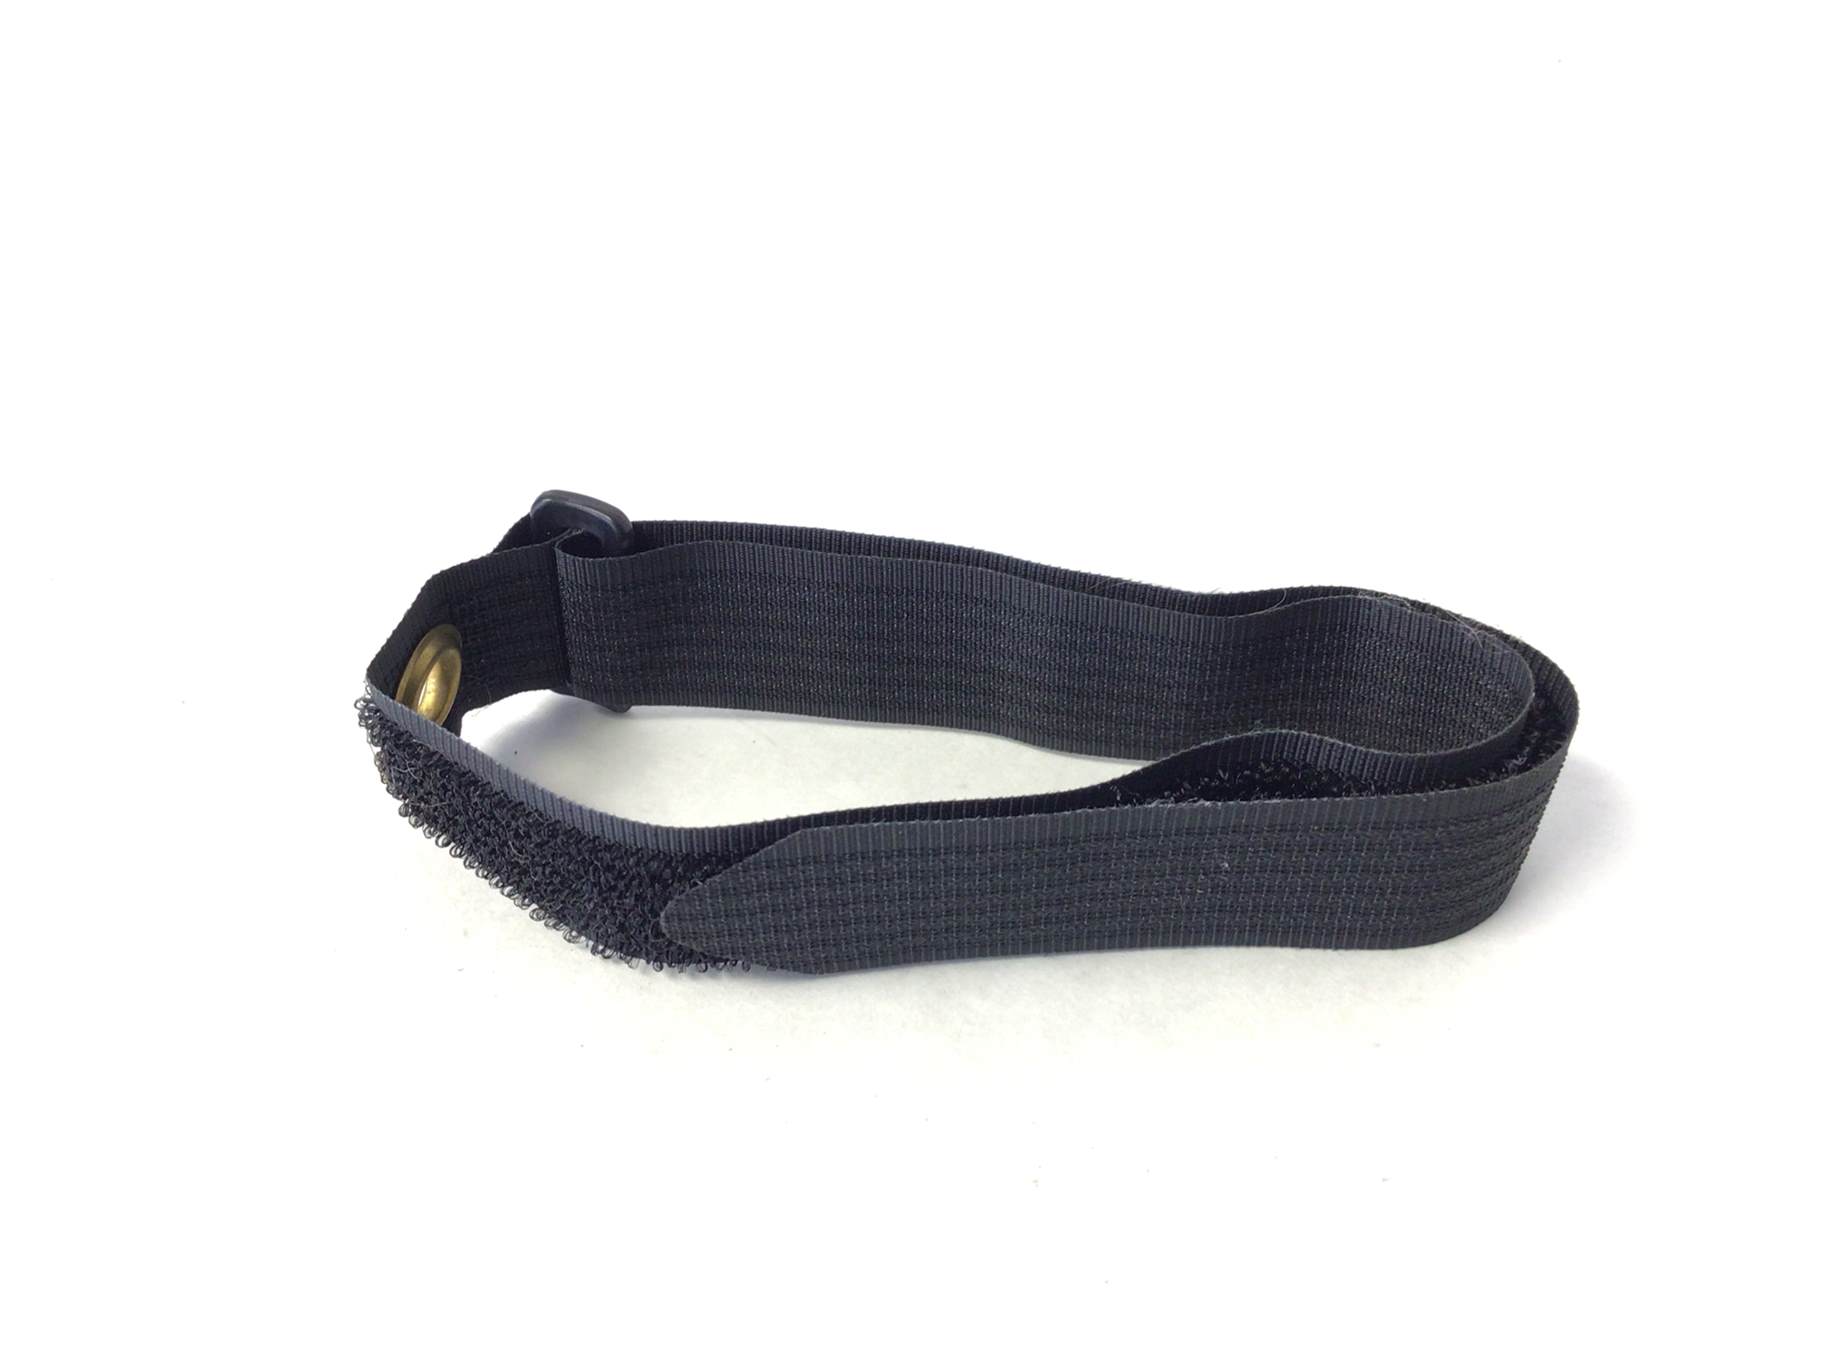 Ankle Attachment Strap - Harness (Used)